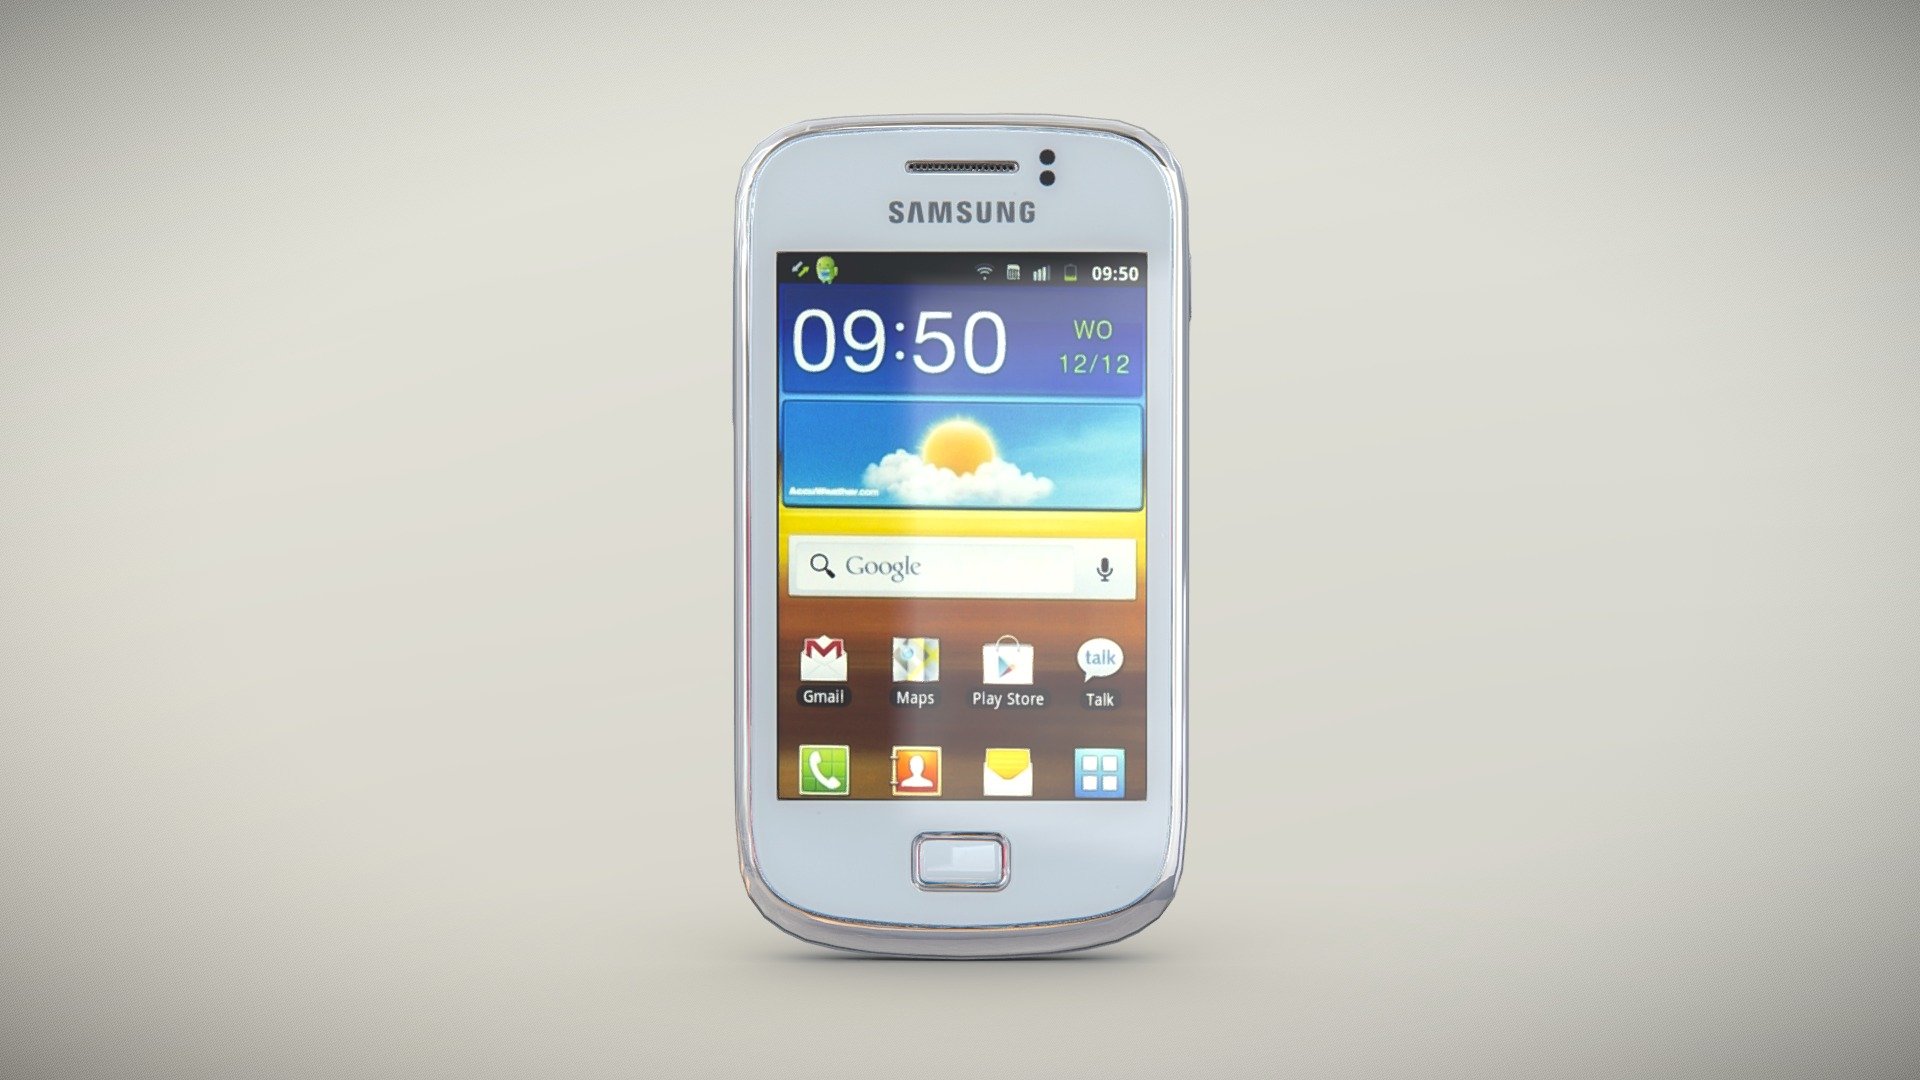 •   Let me present to you high-quality low-poly 3D model Samsung S6500 Galaxy Mini II White. Modeling was made with ortho-photos of real phone that is why all details of design are recreated most authentically.

•    This model consists of one mesh, it is low-polygonal and it has only one material.

•   The total of the main textures is 5. Resolution of all textures is 4096 pixels square aspect ratio in .png format. Also there is original texture file .PSD format in separate archive.

•   Polygon count of the model is – 1179.

•   The model has correct dimensions in real-world scale. All parts grouped and named correctly.

•   To use the model in other 3D programs there are scenes saved in formats .fbx, .obj, .DAE, .max (2010 version).

Note: If you see some artifacts on the textures, it means compression works in the Viewer. We recommend setting HD quality for textures. But anyway, original textures have no artifacts 3d model